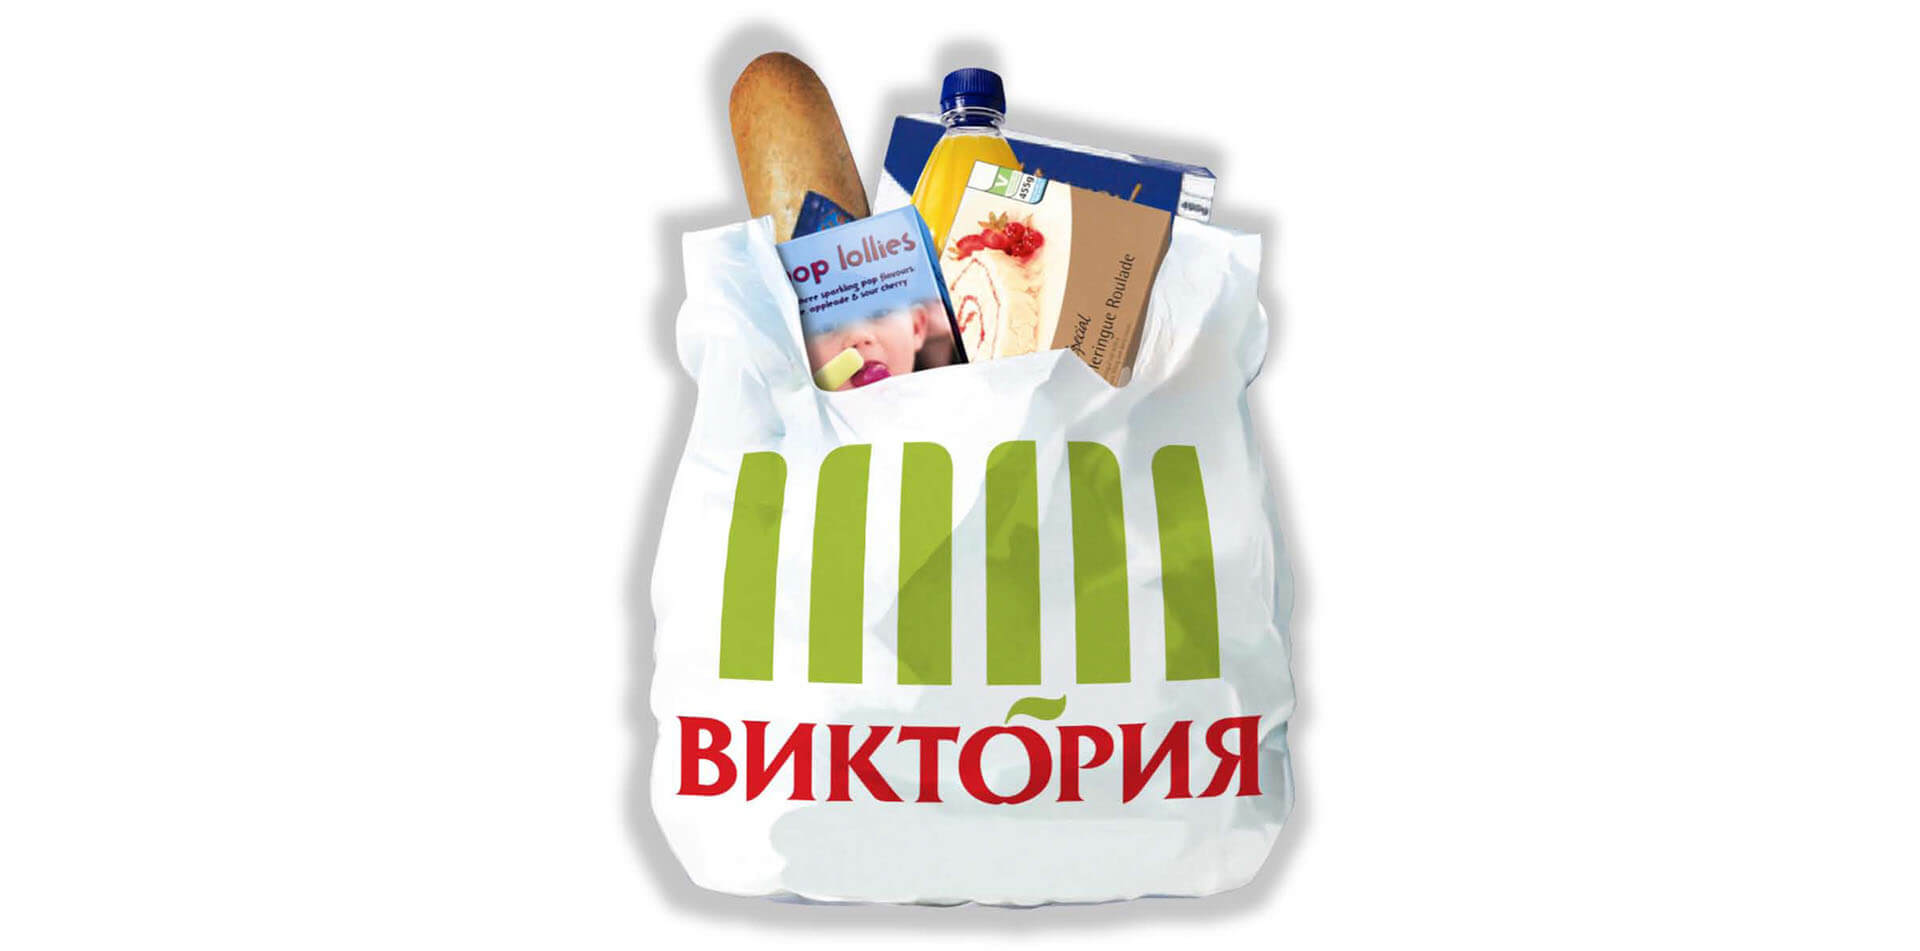 Victoria supermarkets Russian stores brand identity on shopping bags